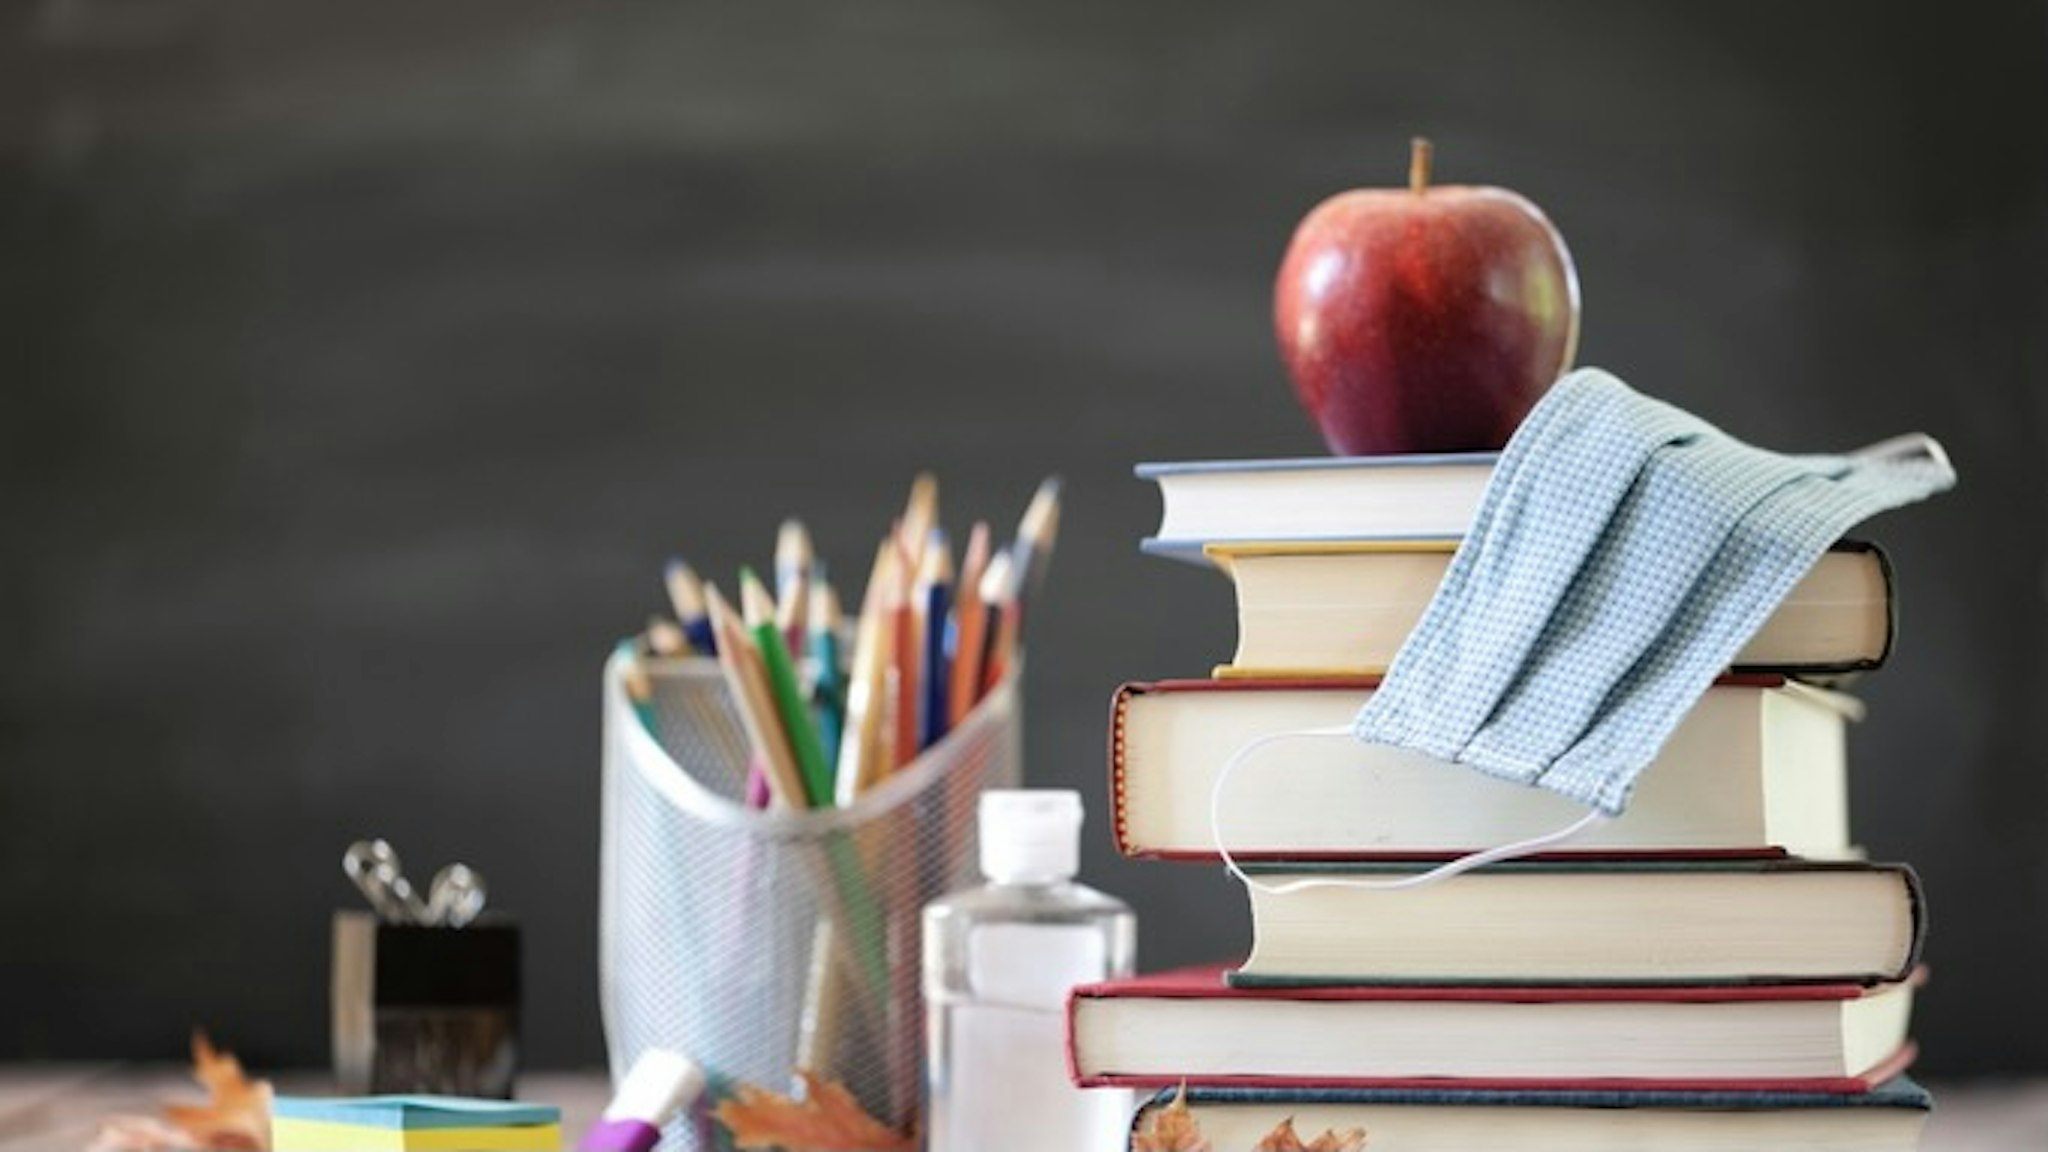 Back to School with Face Mask - stock photo Back to School. Stack of Books with Apple on Top and protective face mask